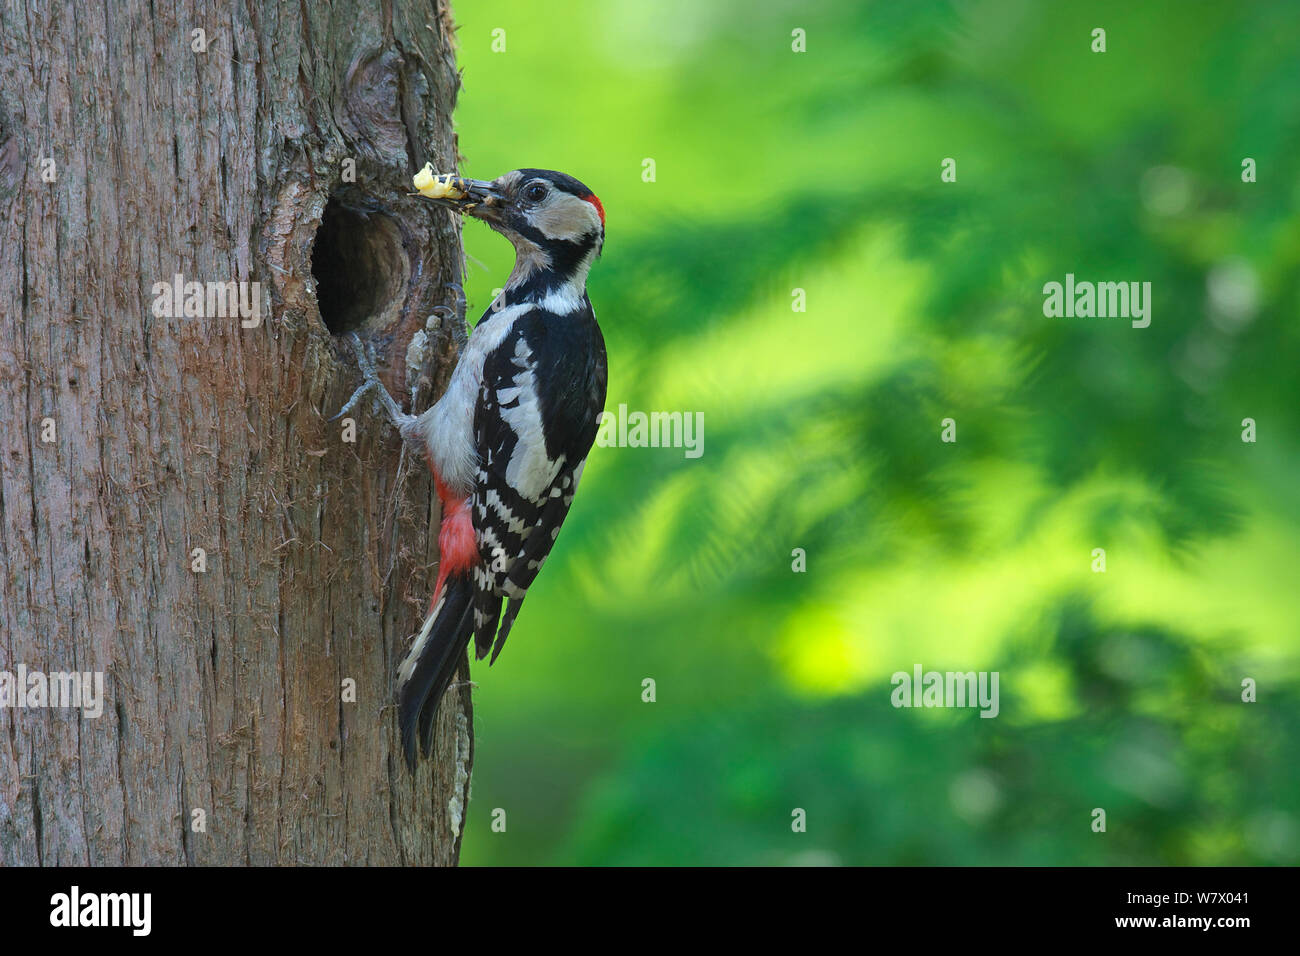 Great Spotted Woodpecker (Dendrocopos major) at nest in tree hole with prey, Xinyang DongZhai nature reserve, Henan province, China, Asia Stock Photo